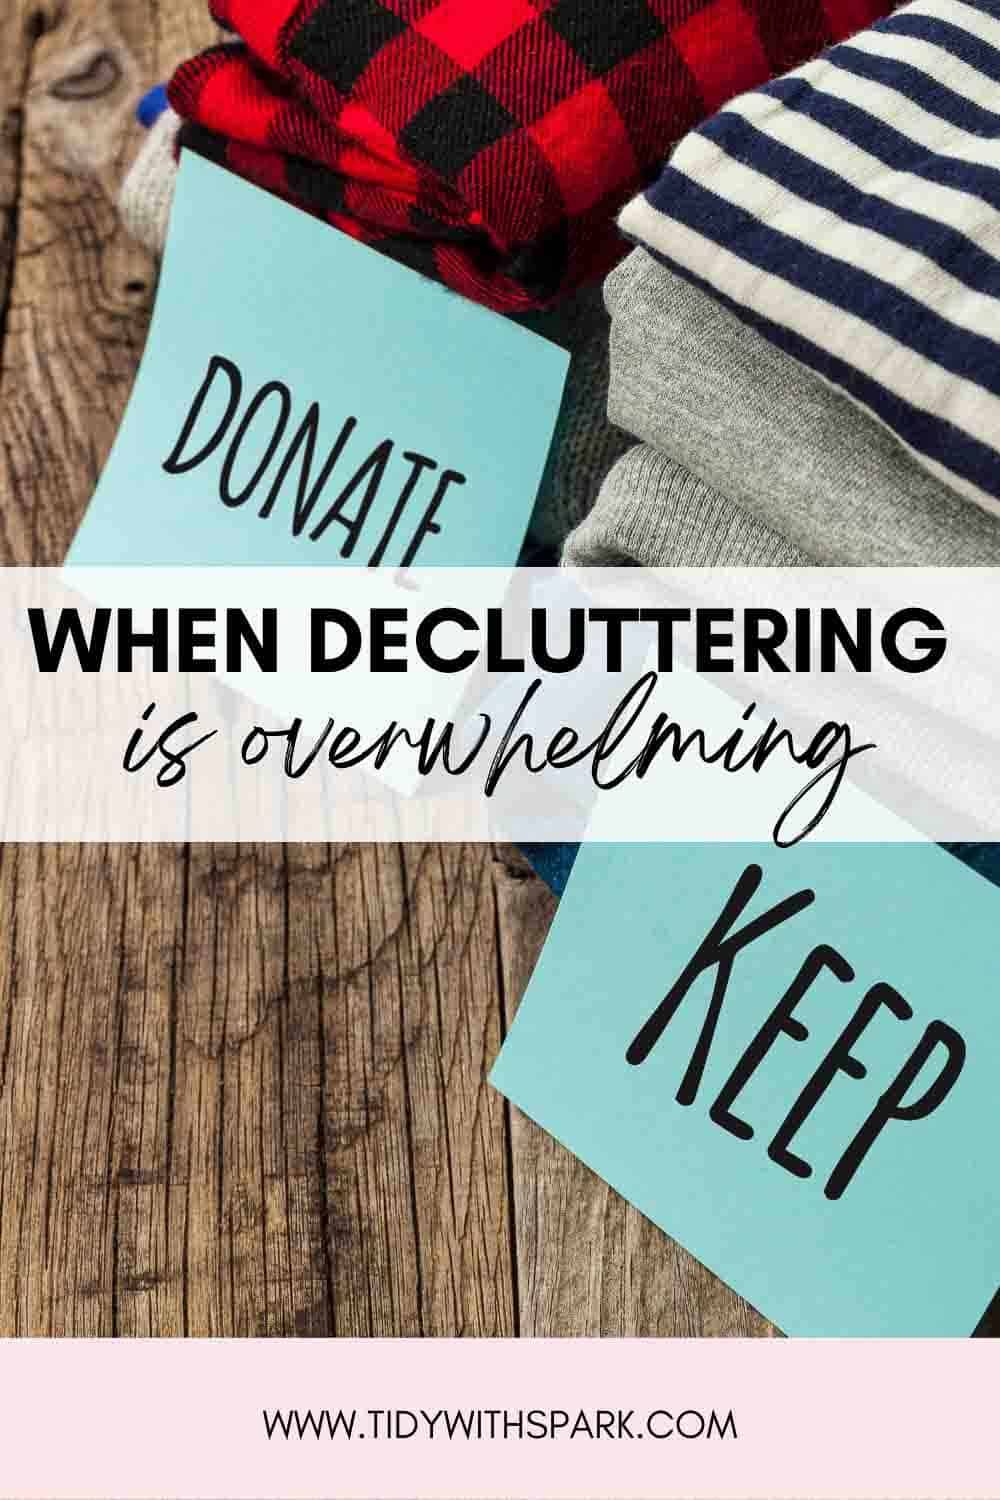 Promotional image for When decluttering is overwhelming for tidy with spark blog